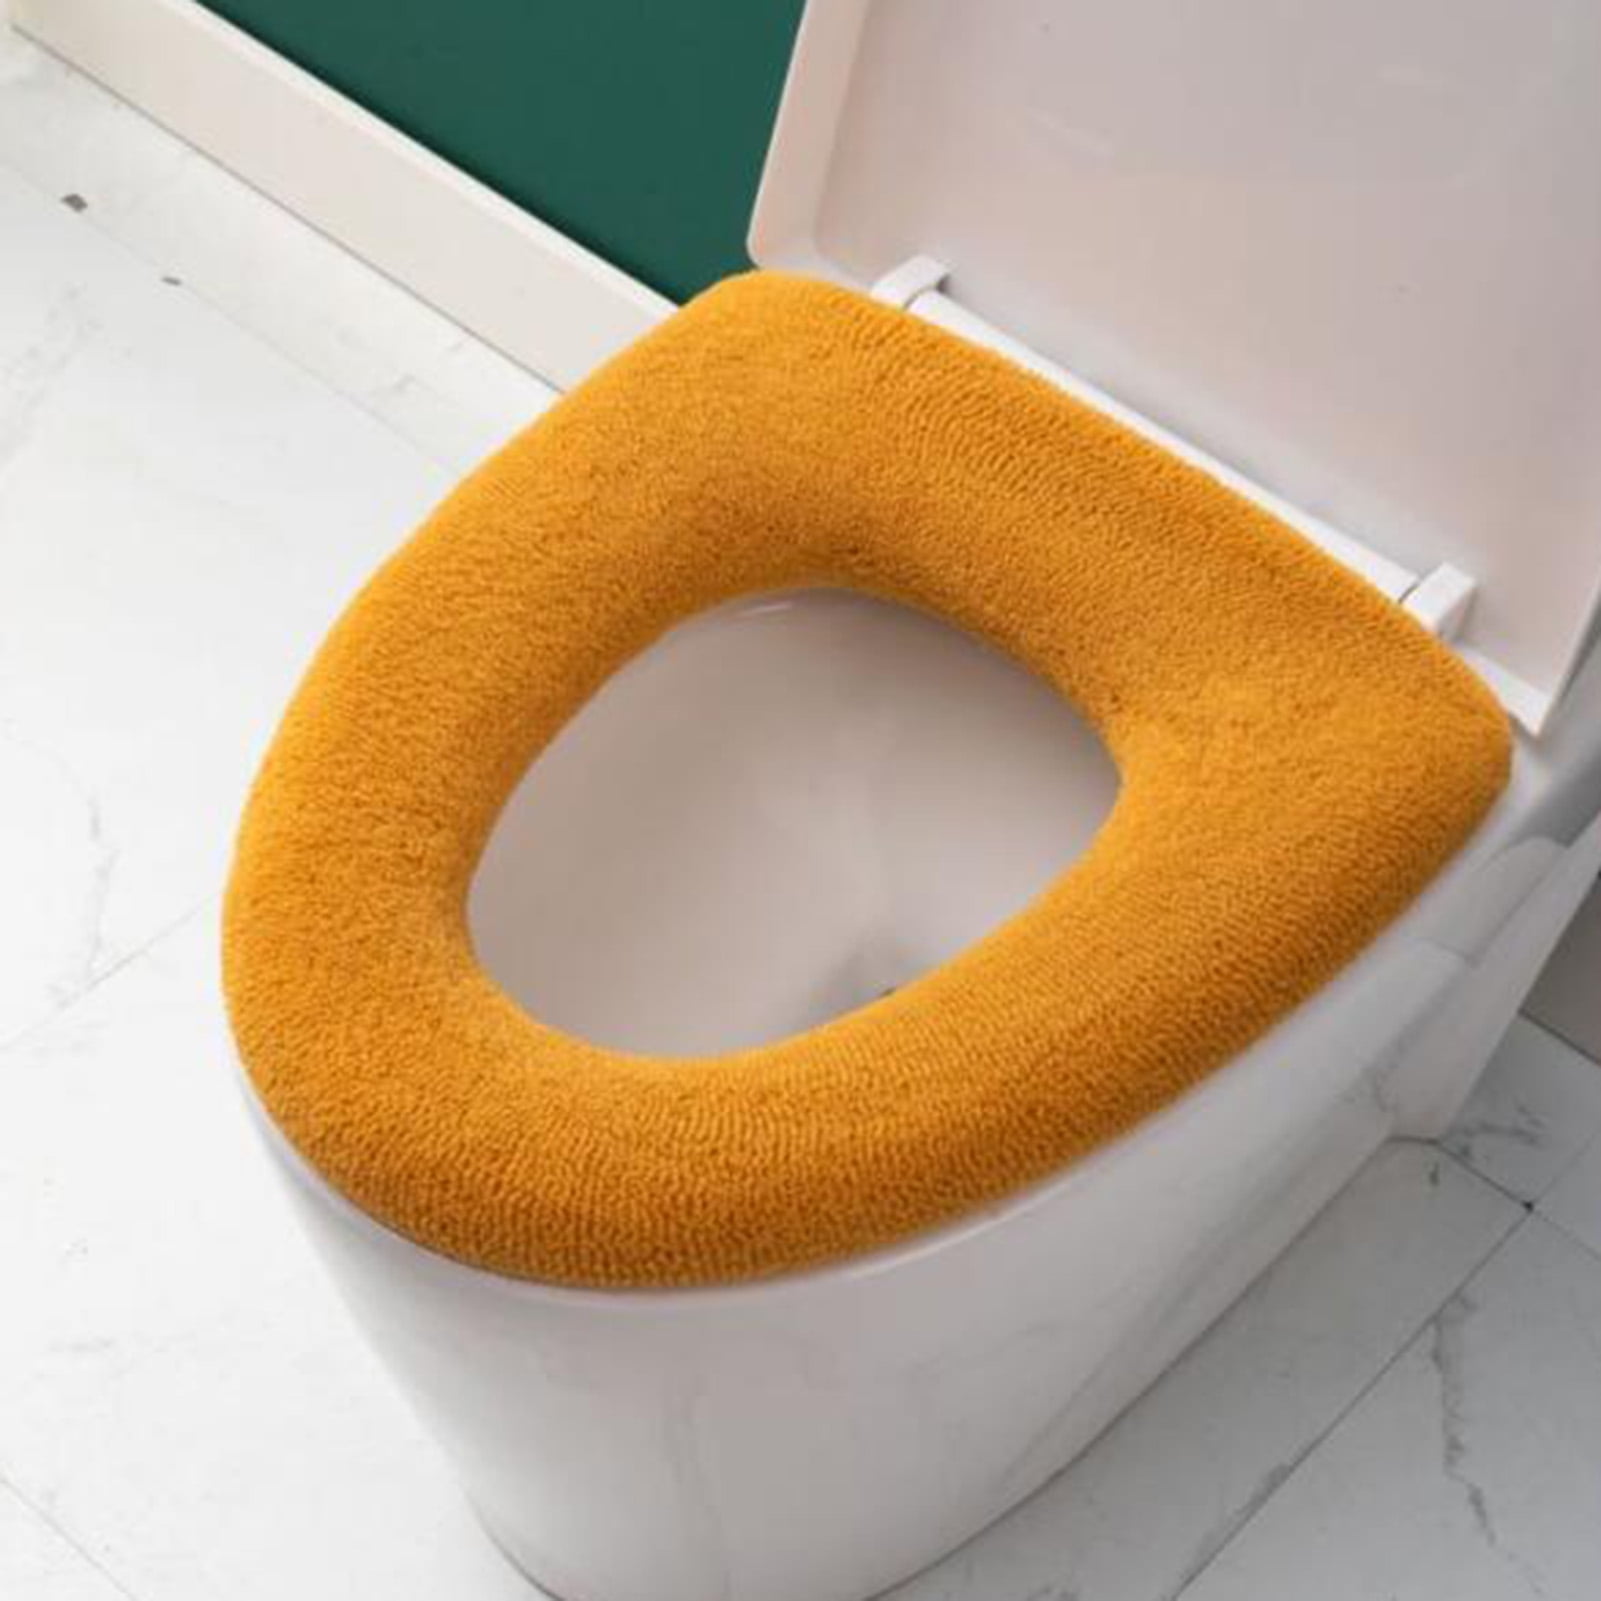  NUPYQL Toilet Seat Cushion, Soft and Warm Toilet Mat and Toilet  Seat Cover Pads, Maximum Pressure Relief, Washable, for Standard U & O  Shape Toilet Seats - Green, Type O 